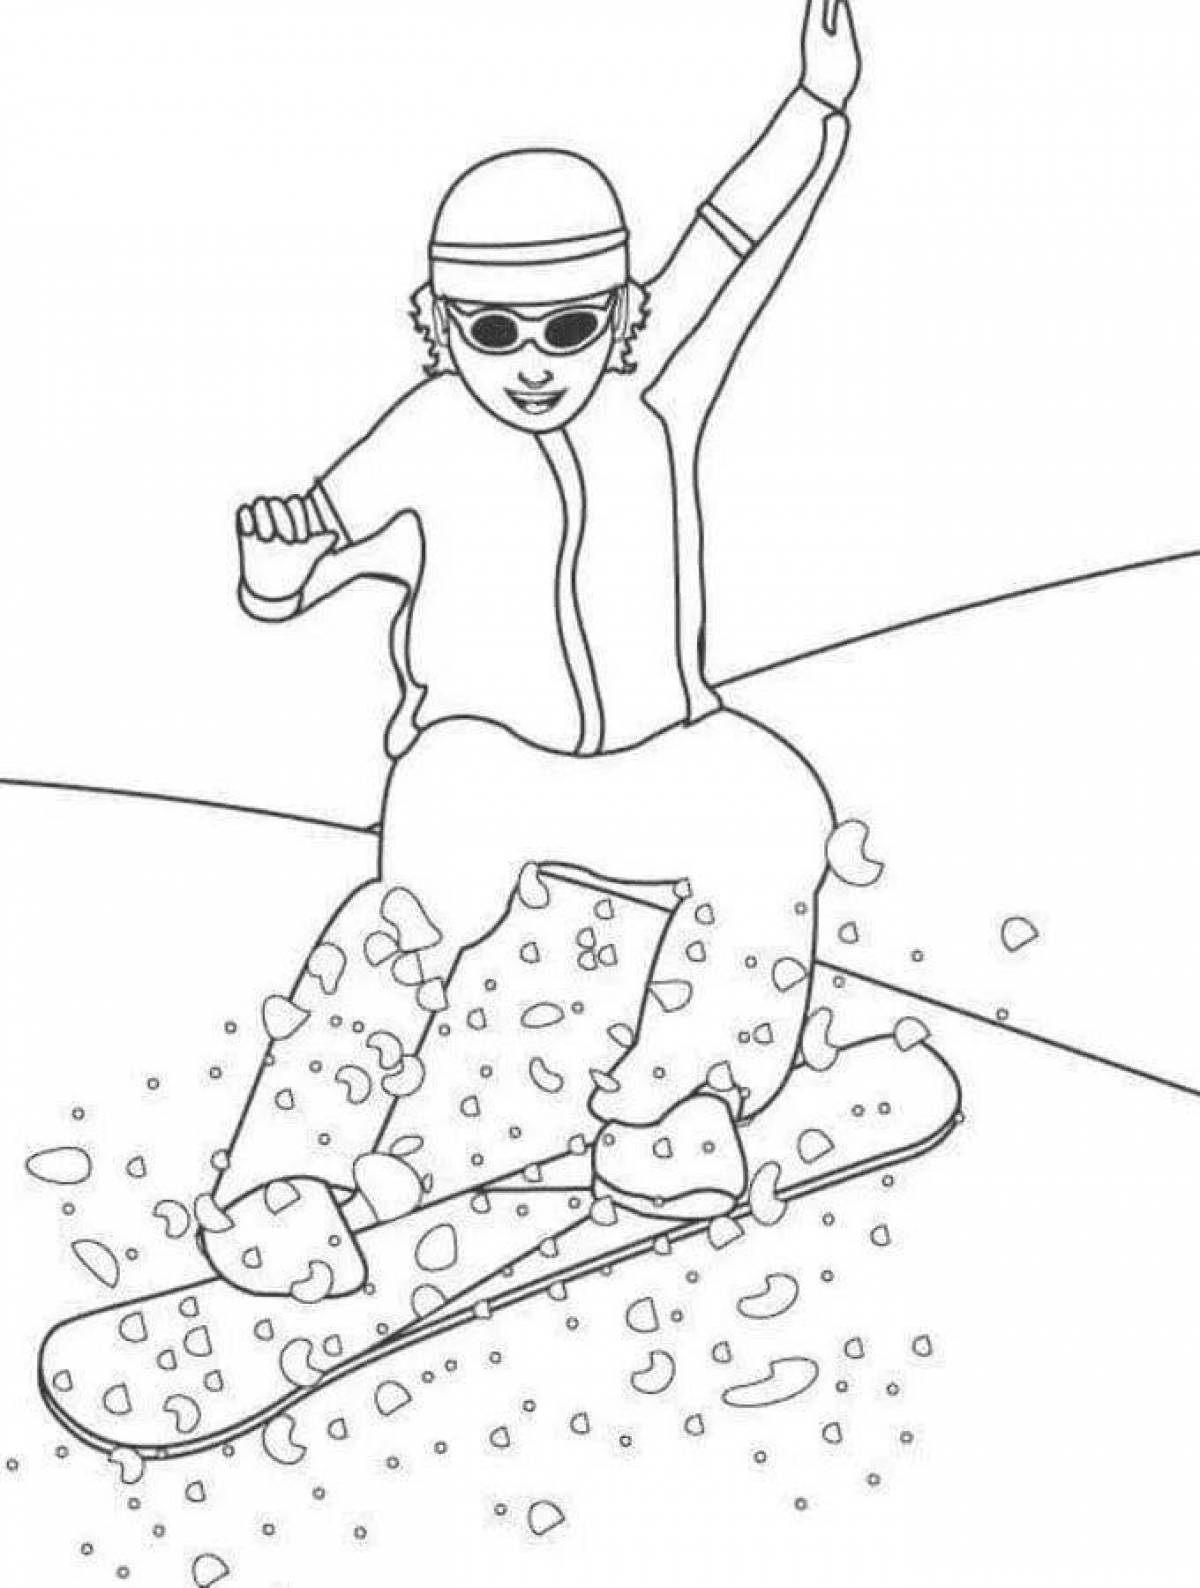 Magic winter sports coloring book for 4-5 year olds